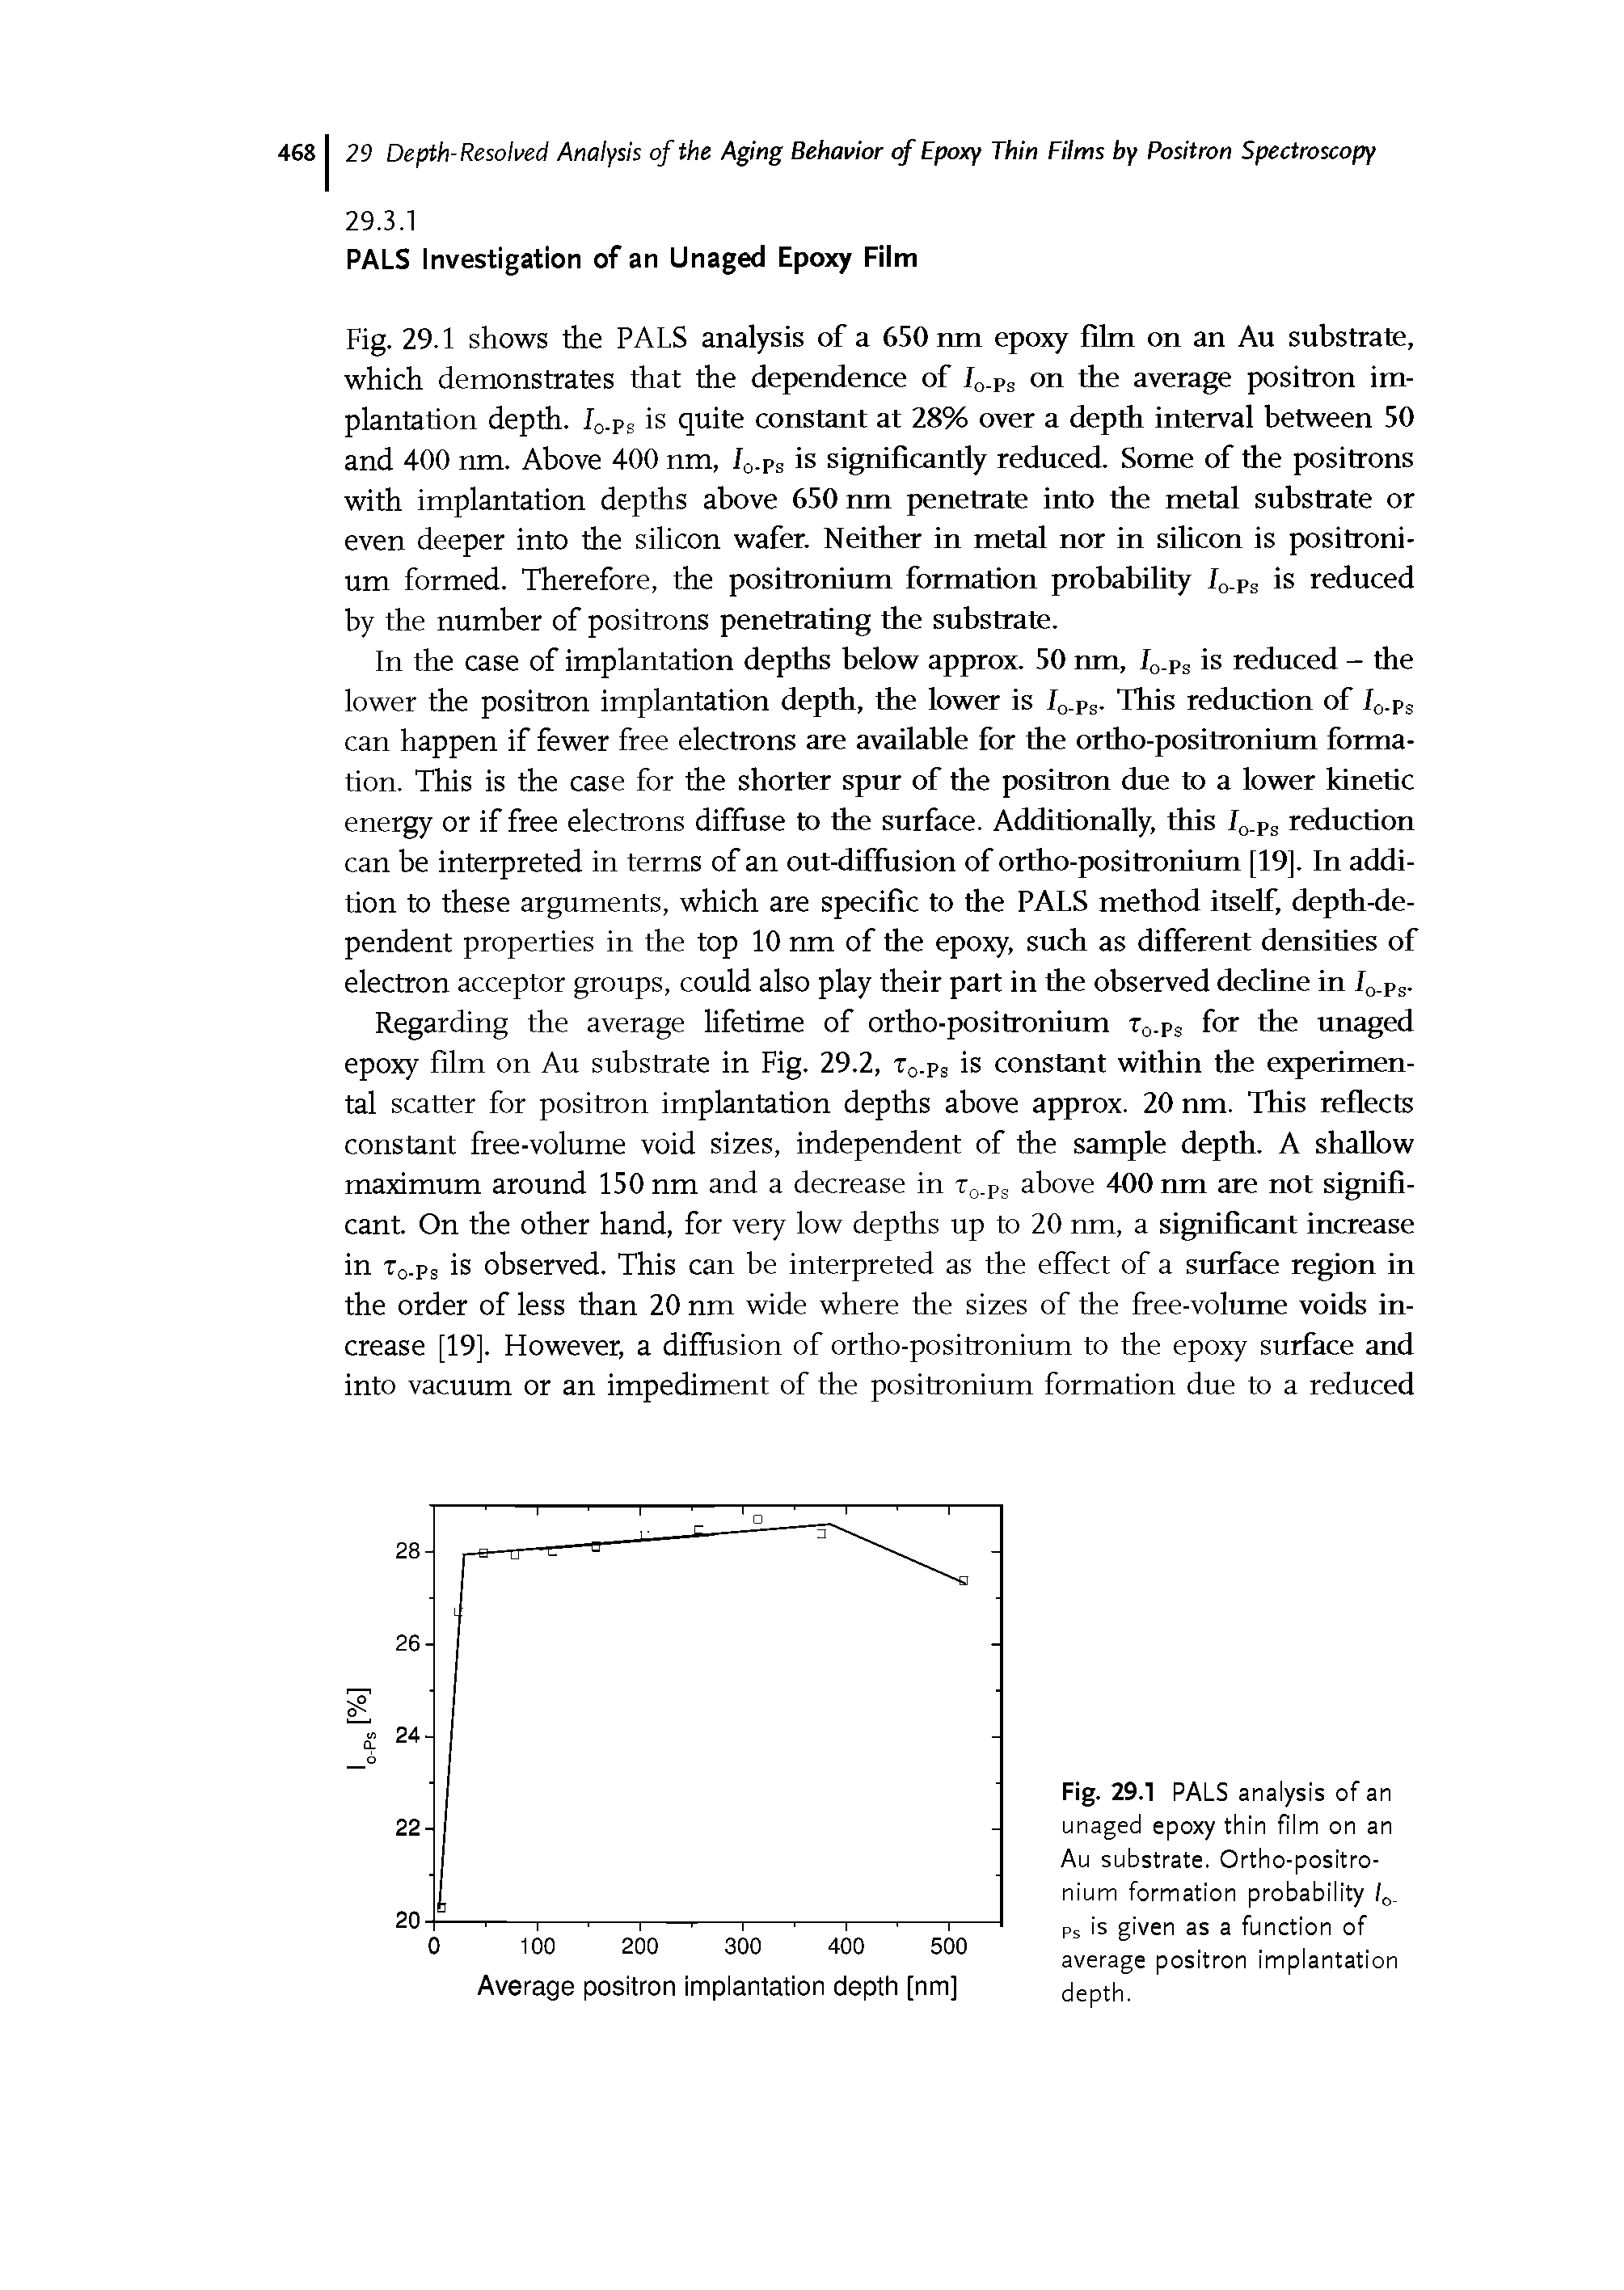 Fig. 29.1 PALS analysis of an unaged epoxy thin film on an Au substrate. Ortho-positronium formation probability Ps is given as a function of average positron implantation depth.